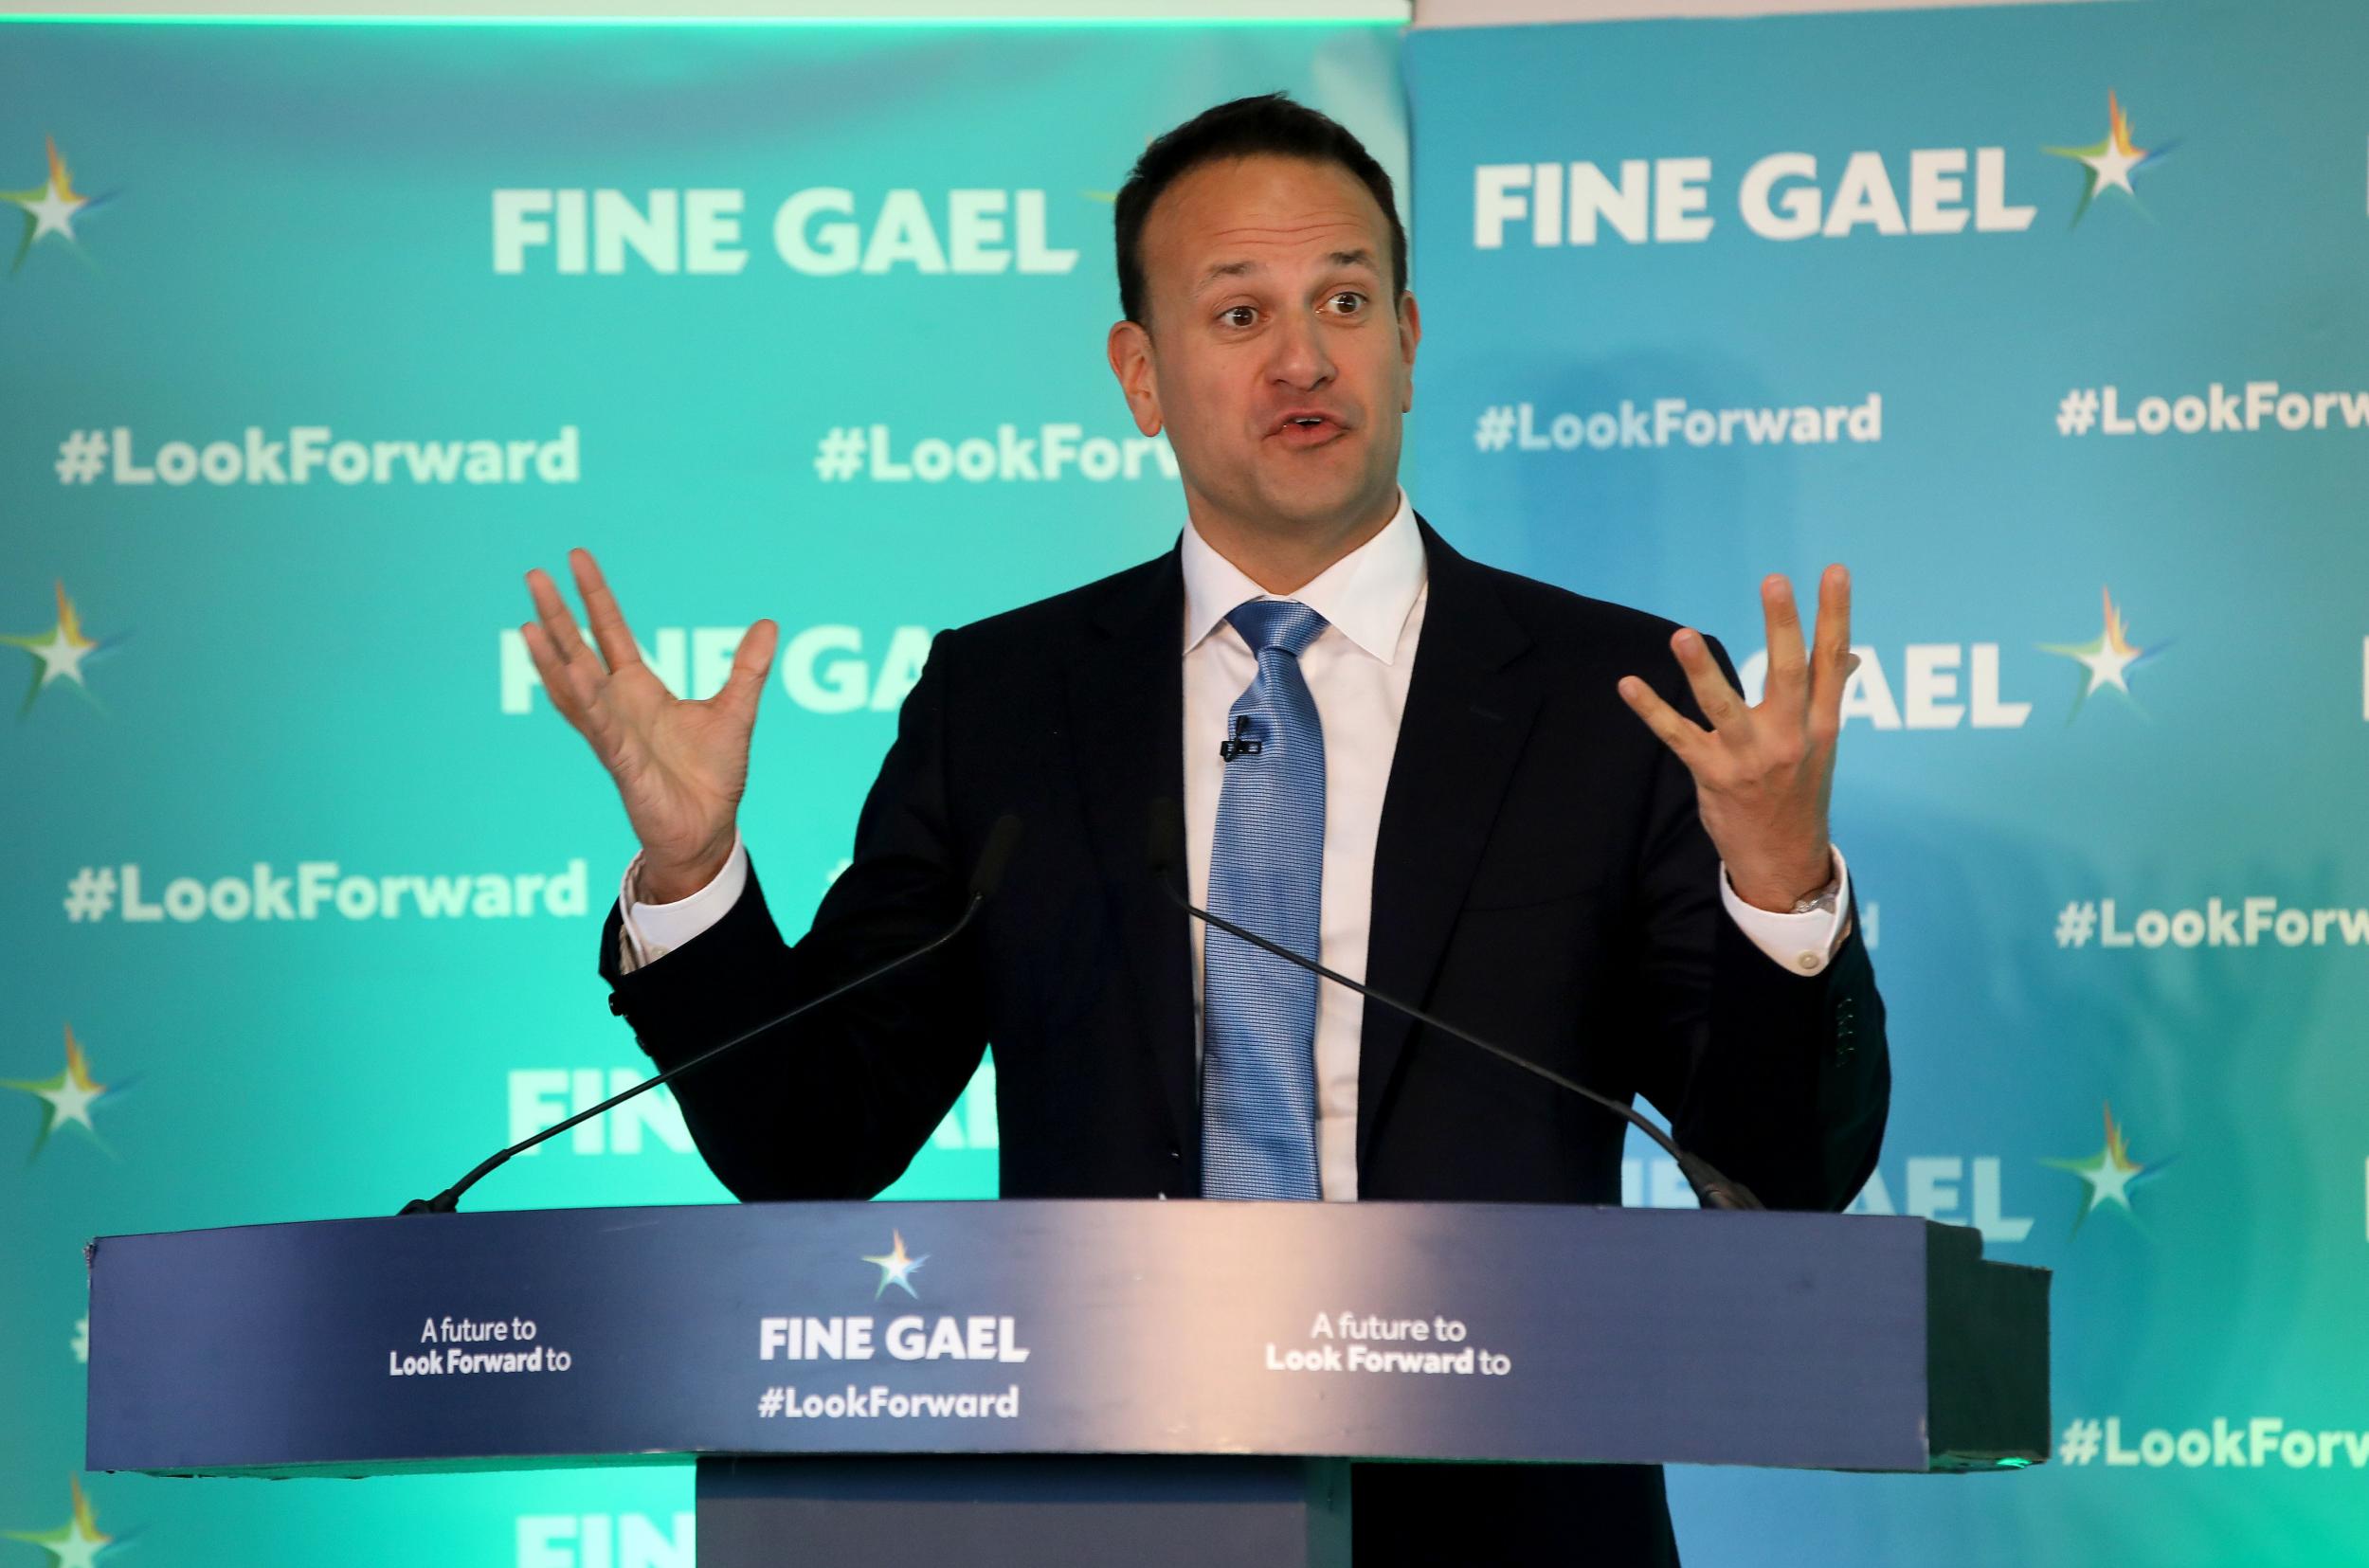 Ireland's Prime Minister Leo Varadkar looks set to lose ground in the election